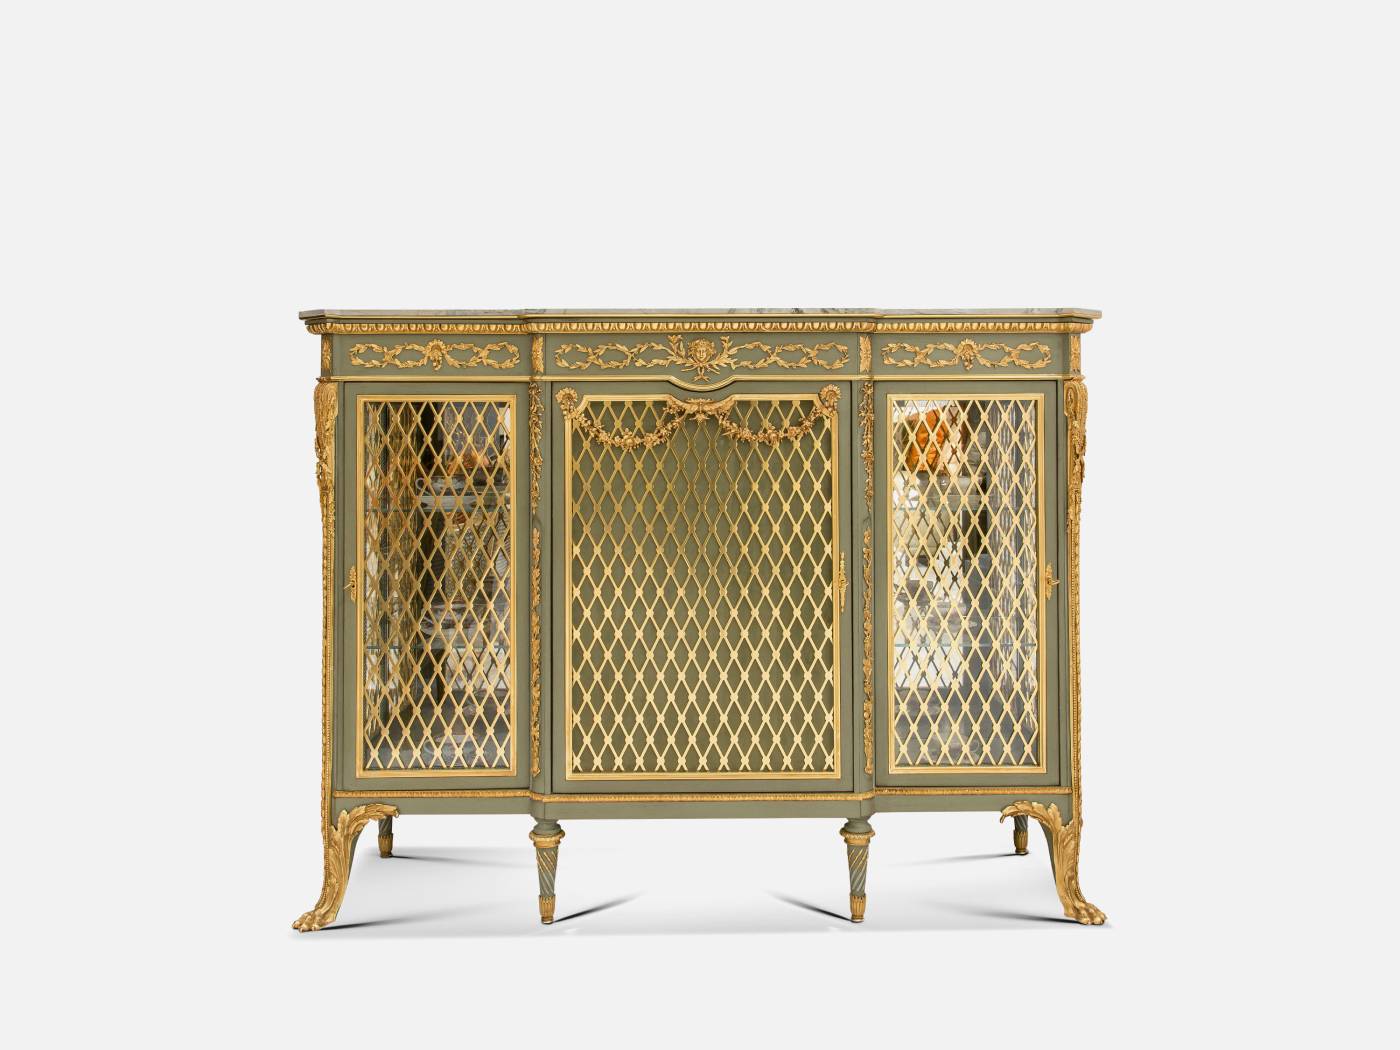 ART. 567/19 – The elegance of luxury classic Sideboards made in Italy by C.G. Capelletti.